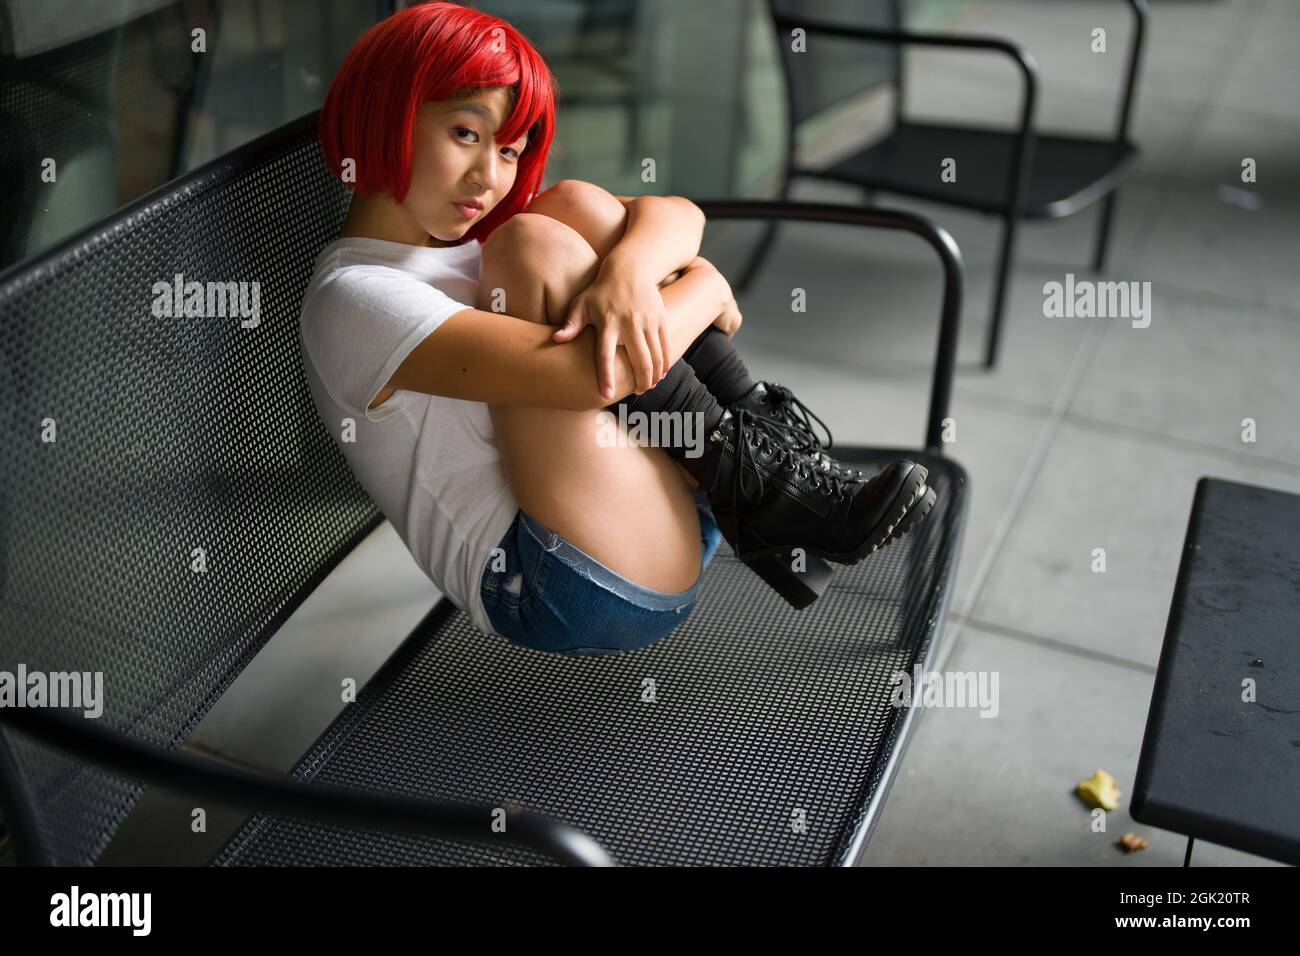 Cosplay Actress in Fetal Position on Bench | Red Blood Cell Cosplay Stock Photo